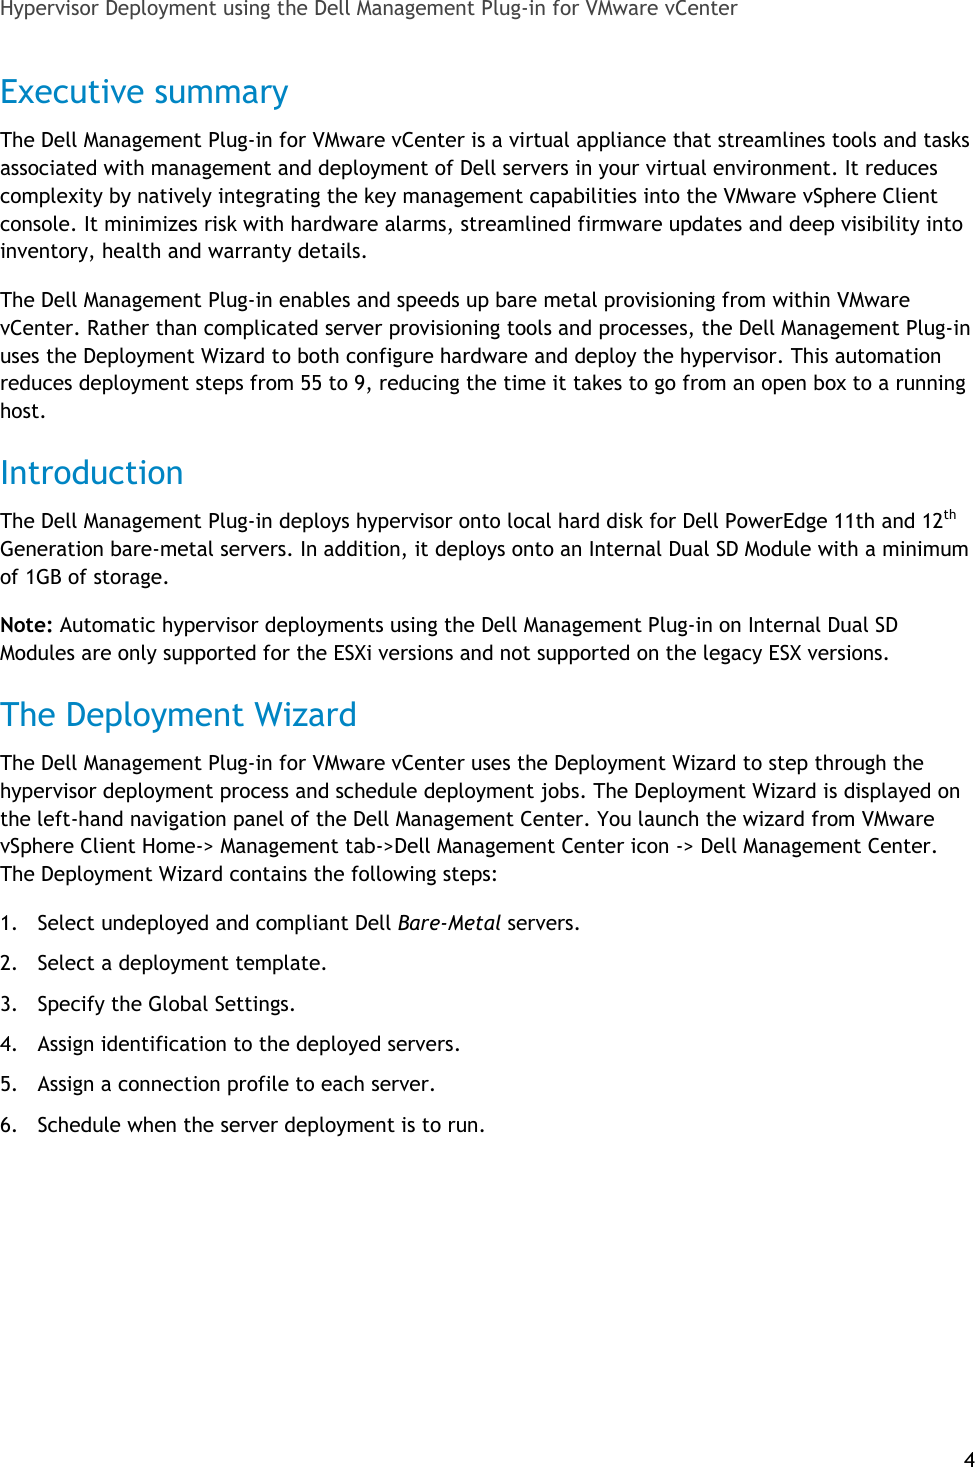 Page 4 of 11 - Dell Dell-Dell-Management-Plug-In-For-Vmware-Vcenter-1-6-Deployment-Guide- Management Plug-in  Dell-dell-management-plug-in-for-vmware-vcenter-1-6-deployment-guide